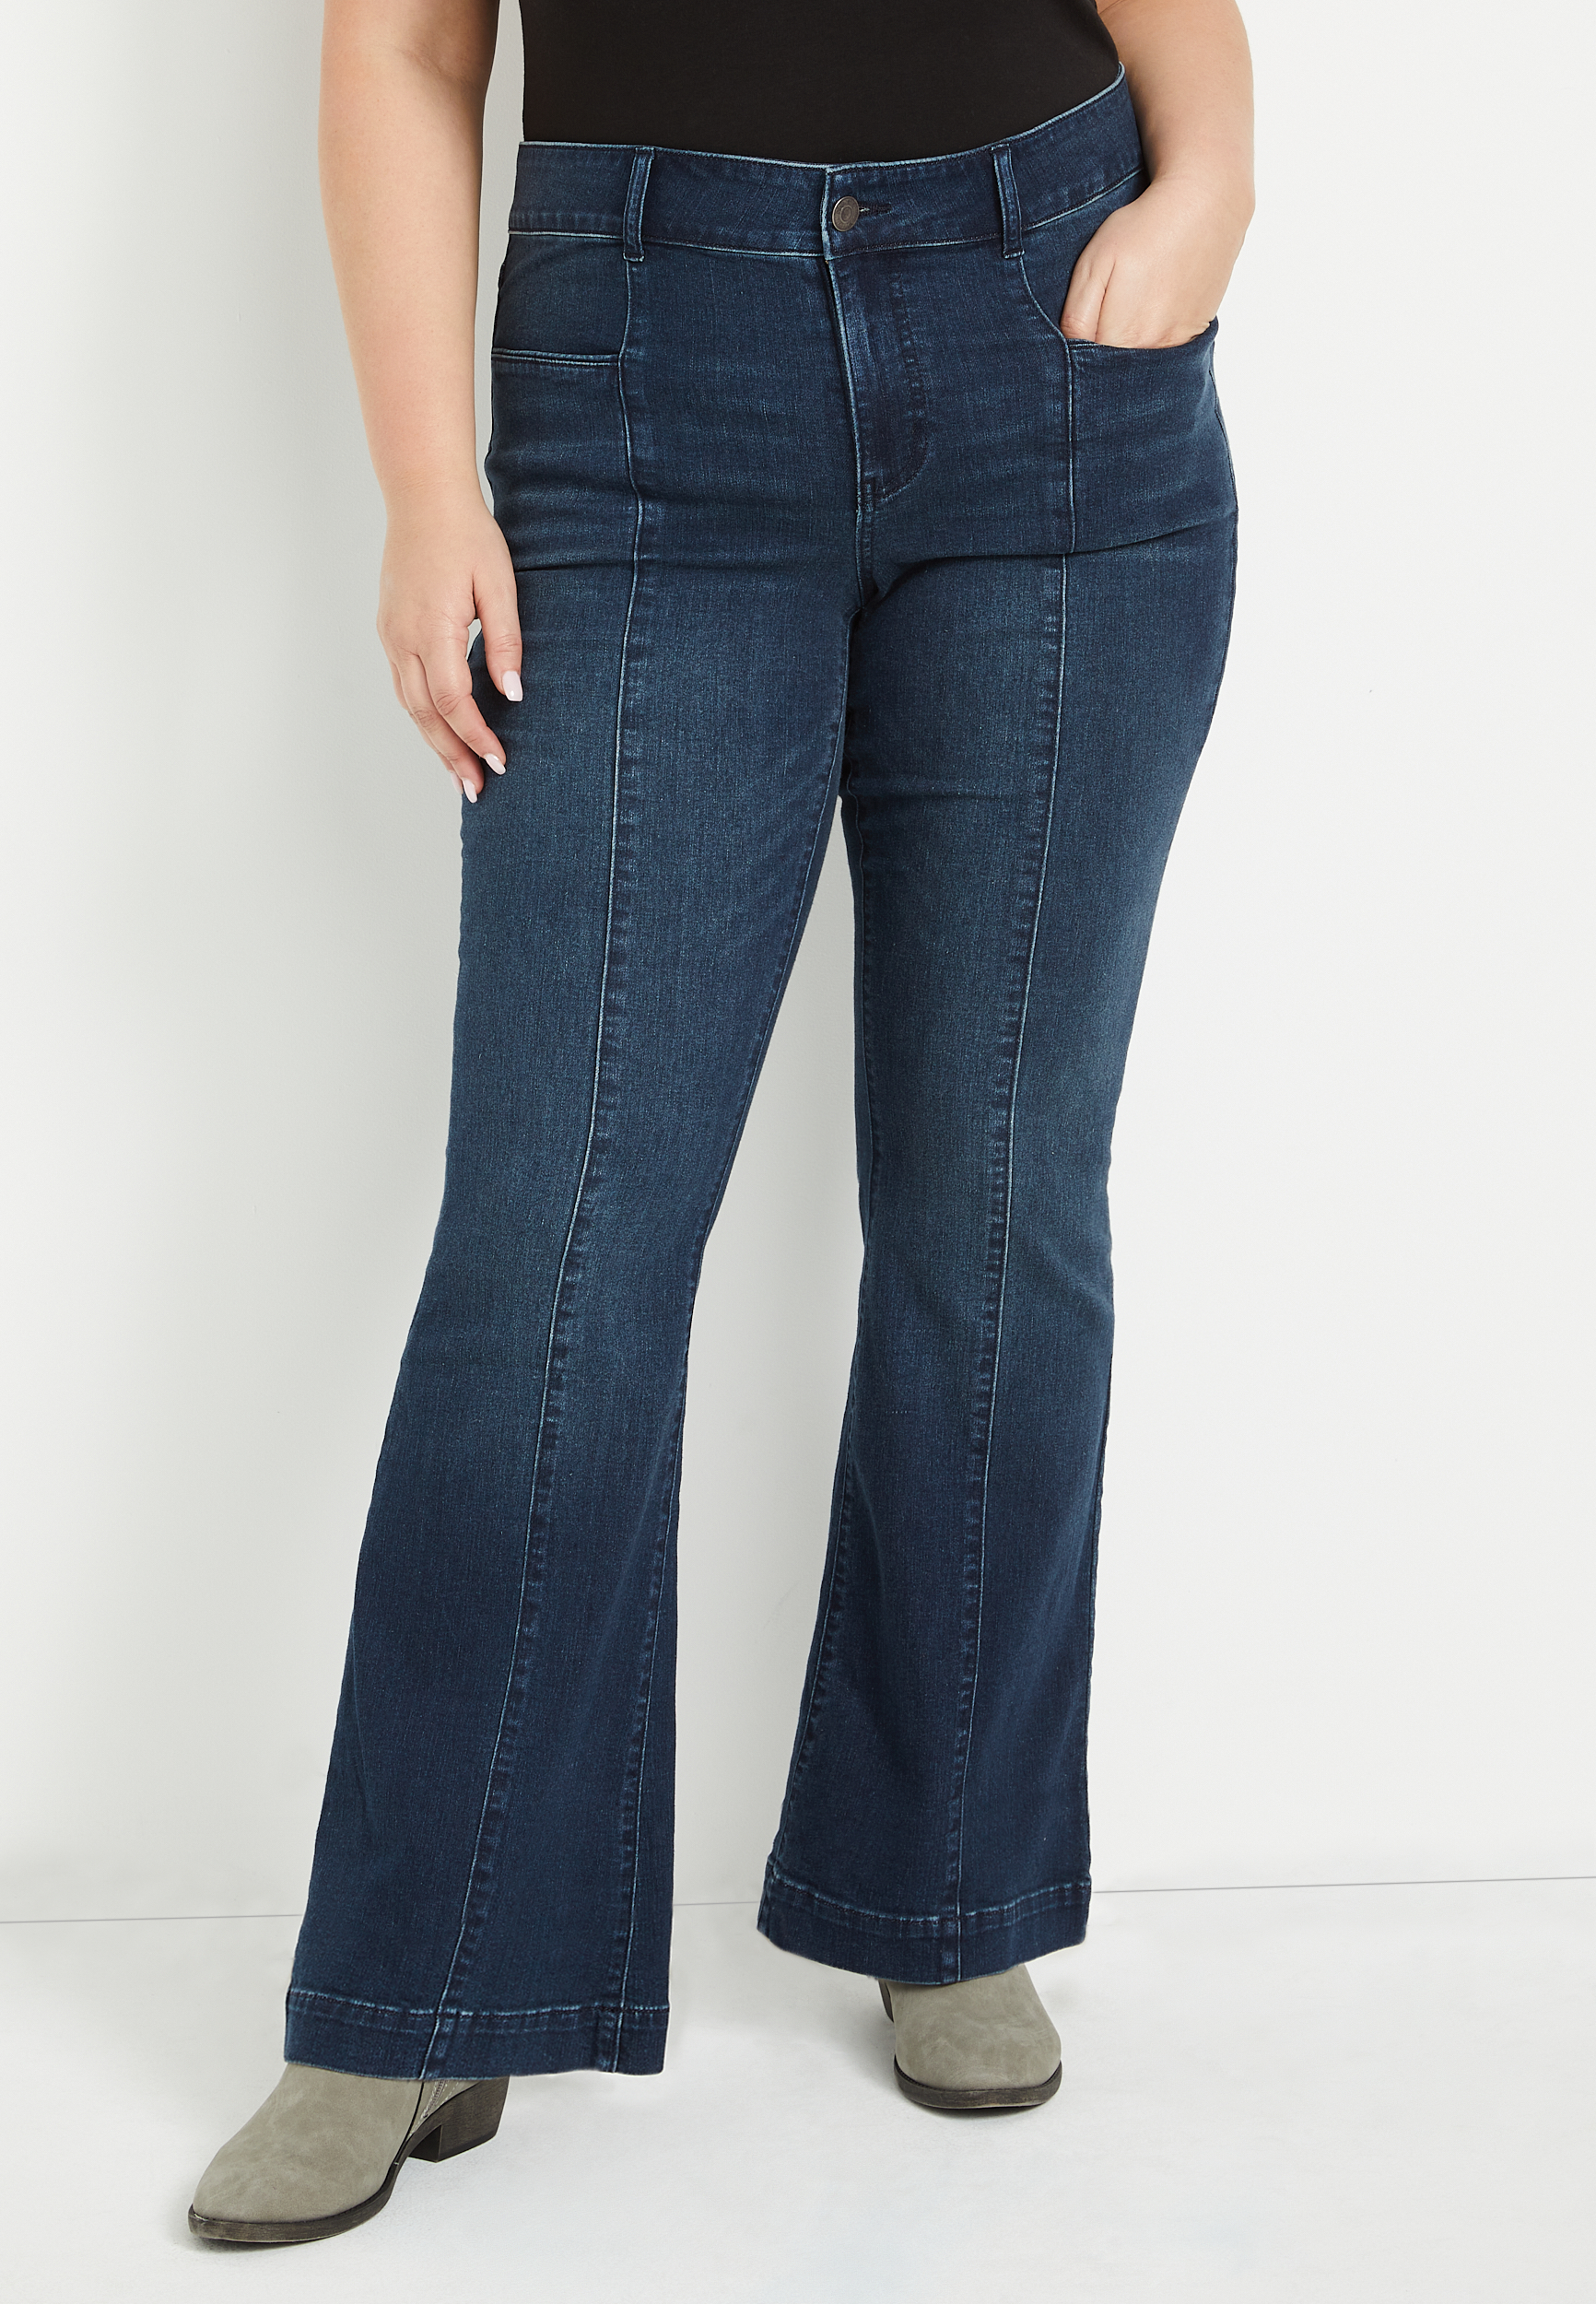 Plus Size Flare & Wide Leg Jeans | maurices